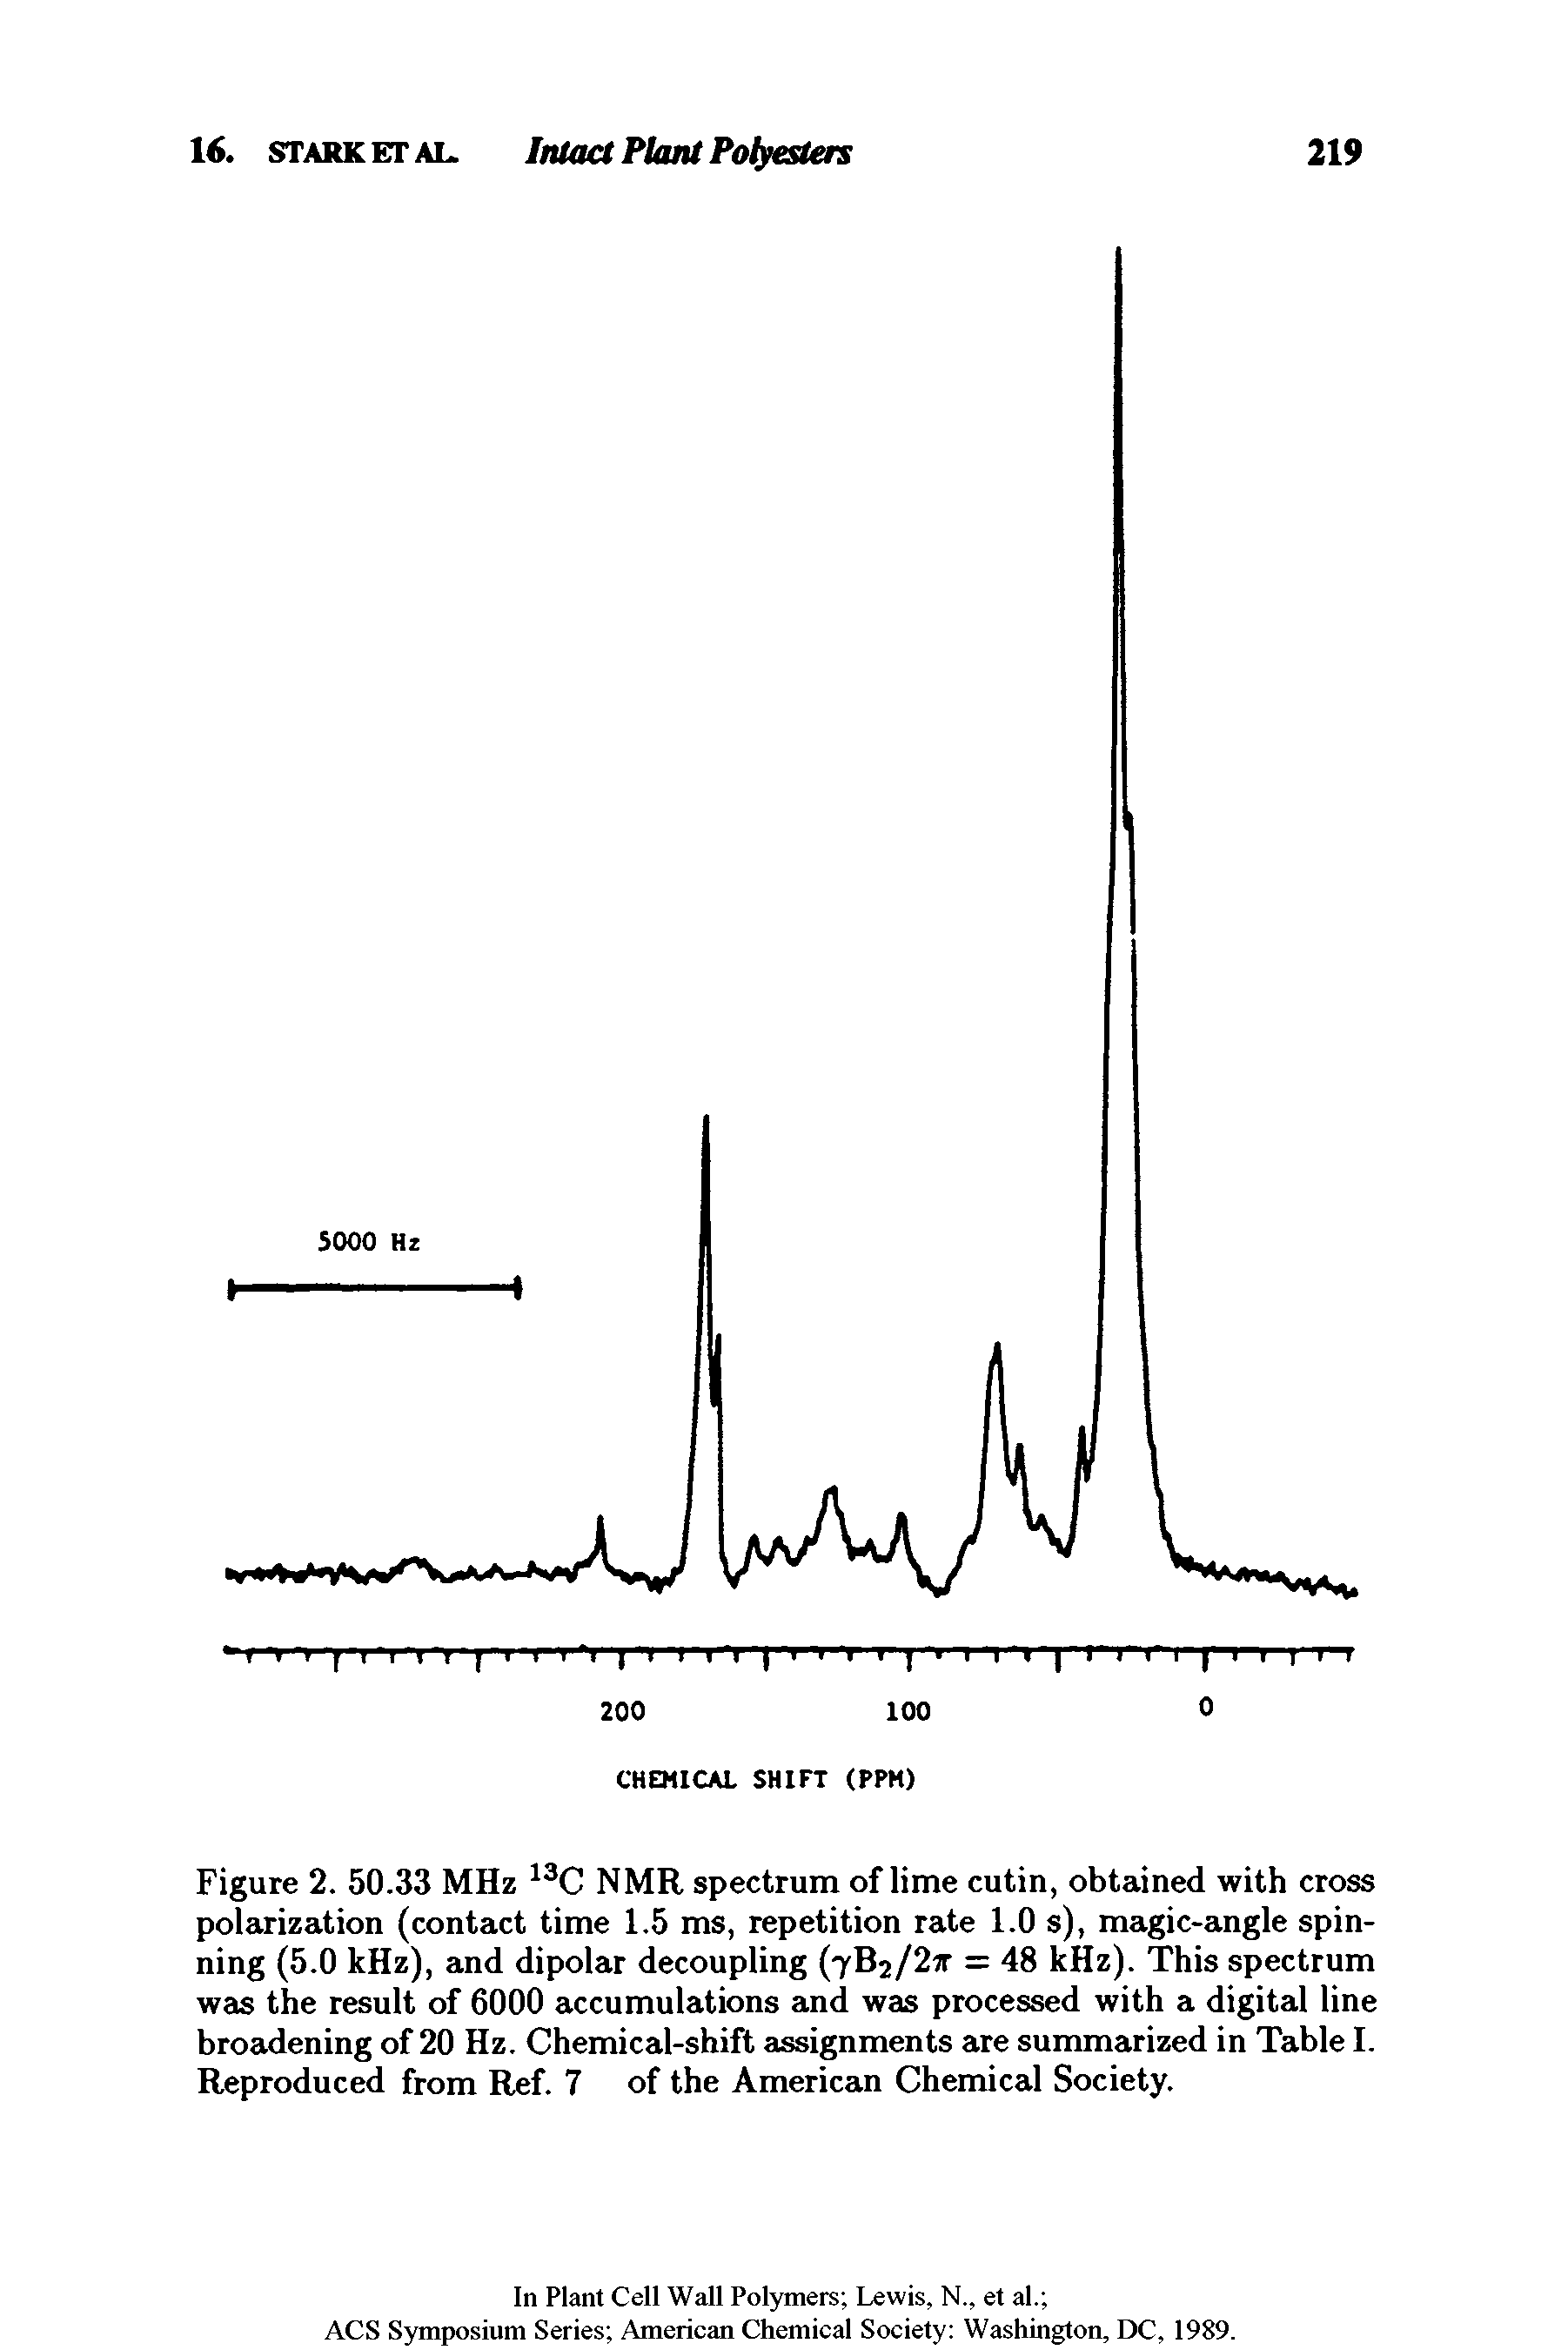 Figure 2. 50.33 MHz 13C NMR spectrum of lime cutin, obtained with cross polarization (contact time 1.5 ms, repetition rate 1.0 s), magic-angle spinning (5.0 kHz), and dipolar decoupling (762/211 = 48 kHz). This spectrum was the result of 6000 accumulations and was processed with a digital line broadening of 20 Hz. Chemical-shift assignments are summarized in Table I. Reproduced from Ref. 7 of the American Chemical Society.